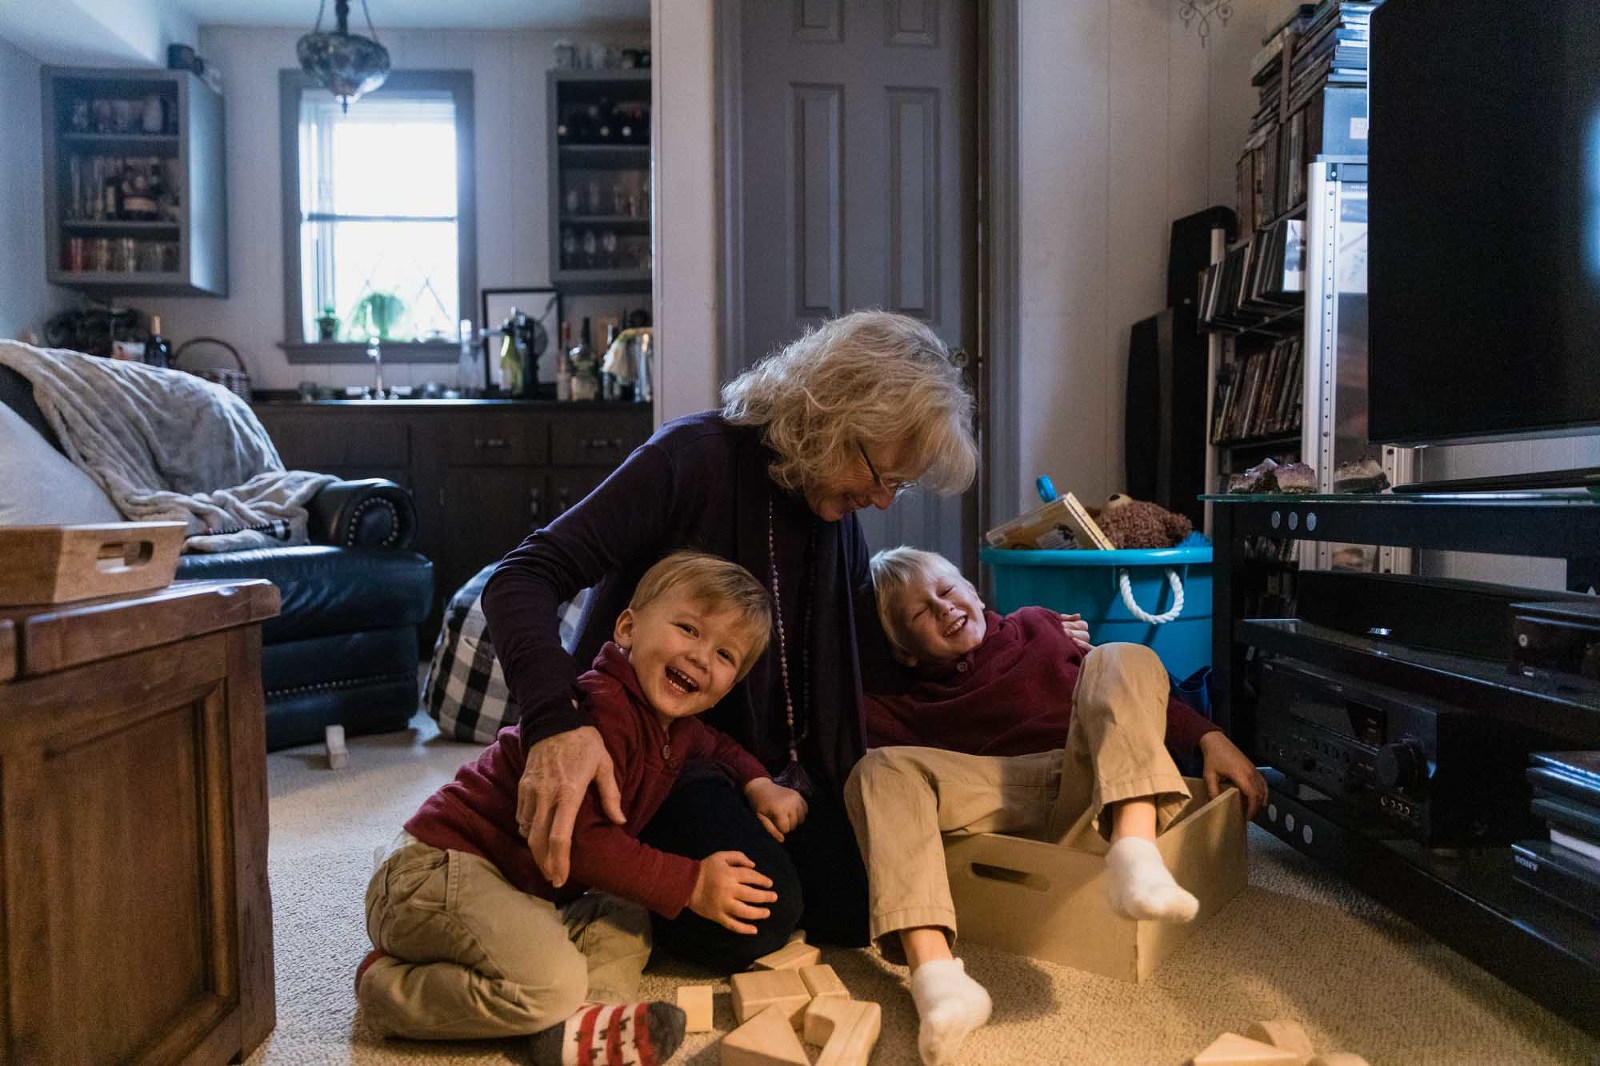 grandma wrestles with two boys on the floor of her home